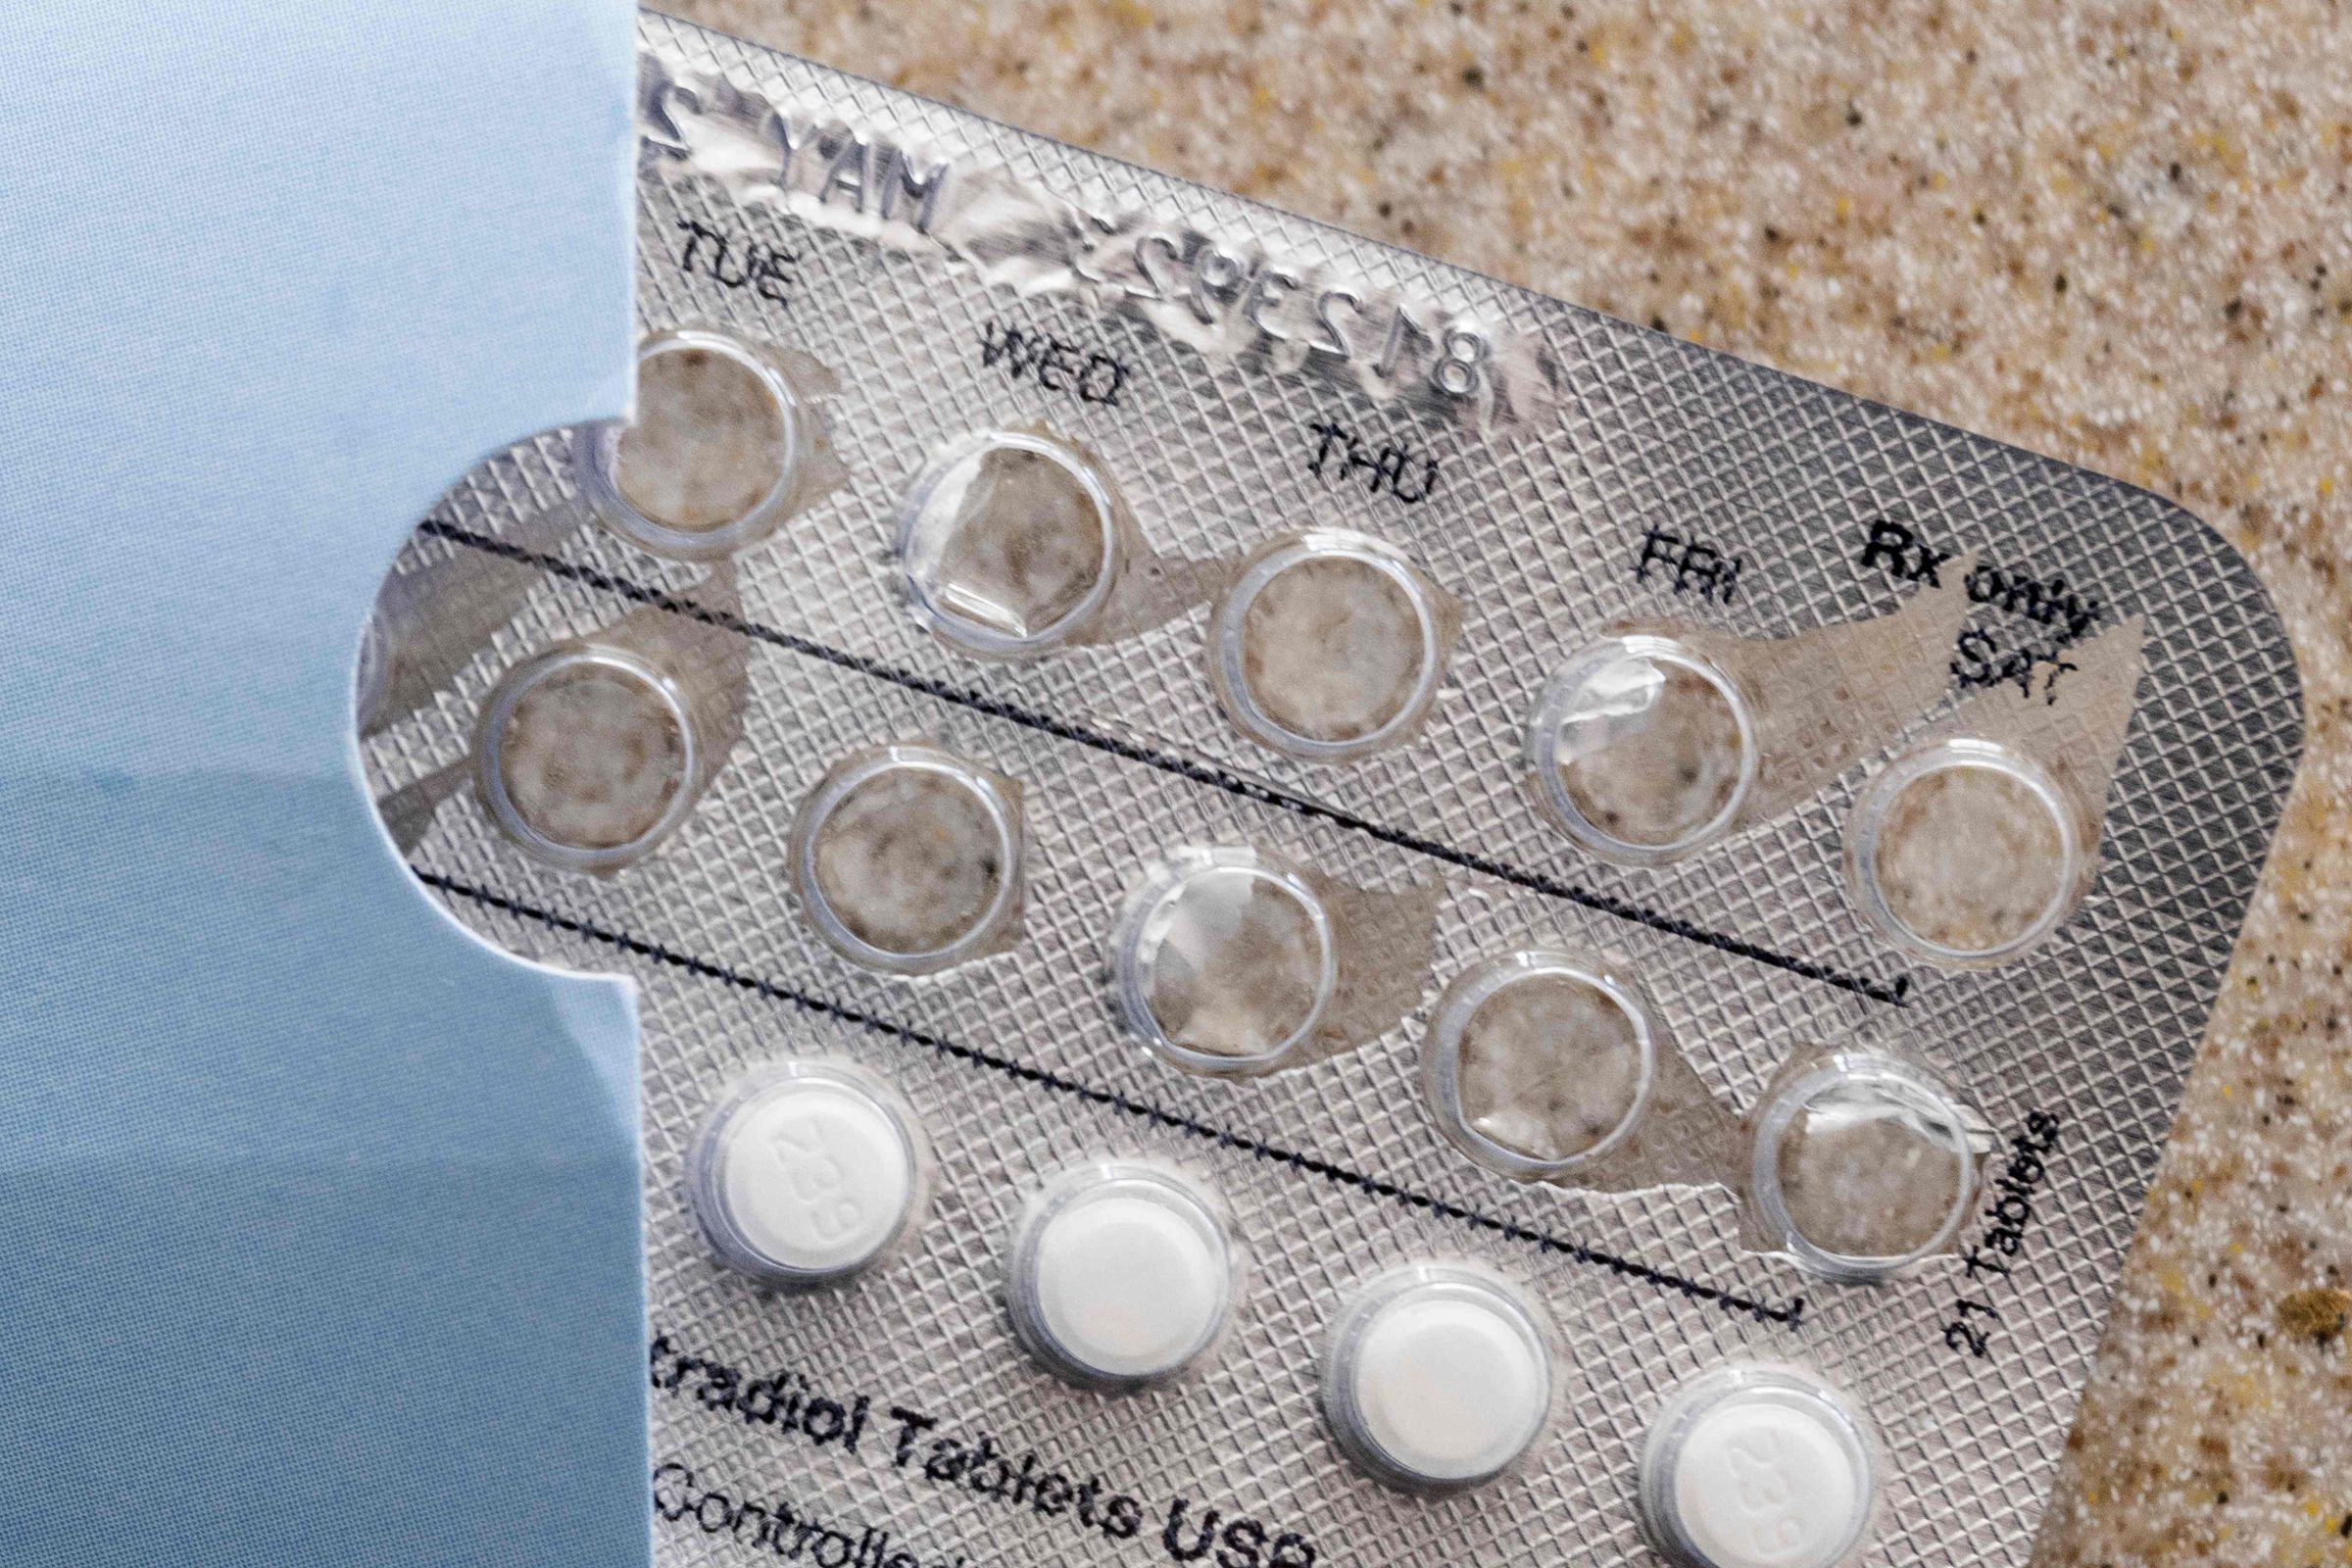 A pack of birth control pills with the first two rows missing.